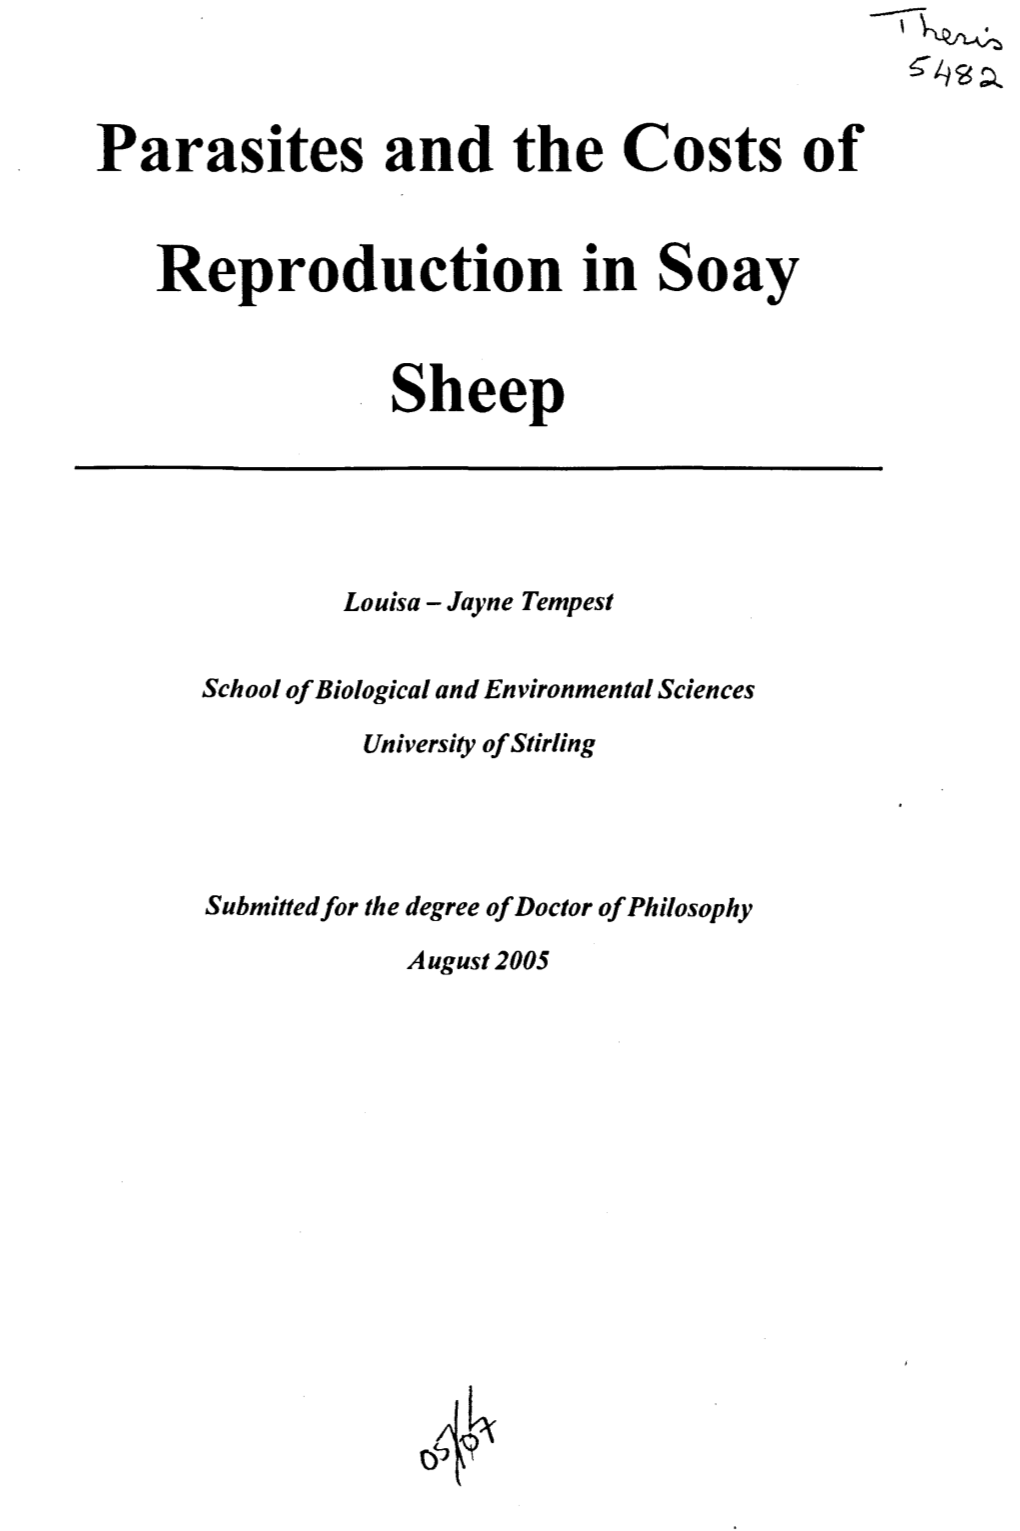 Reproduction in Soay Sheep